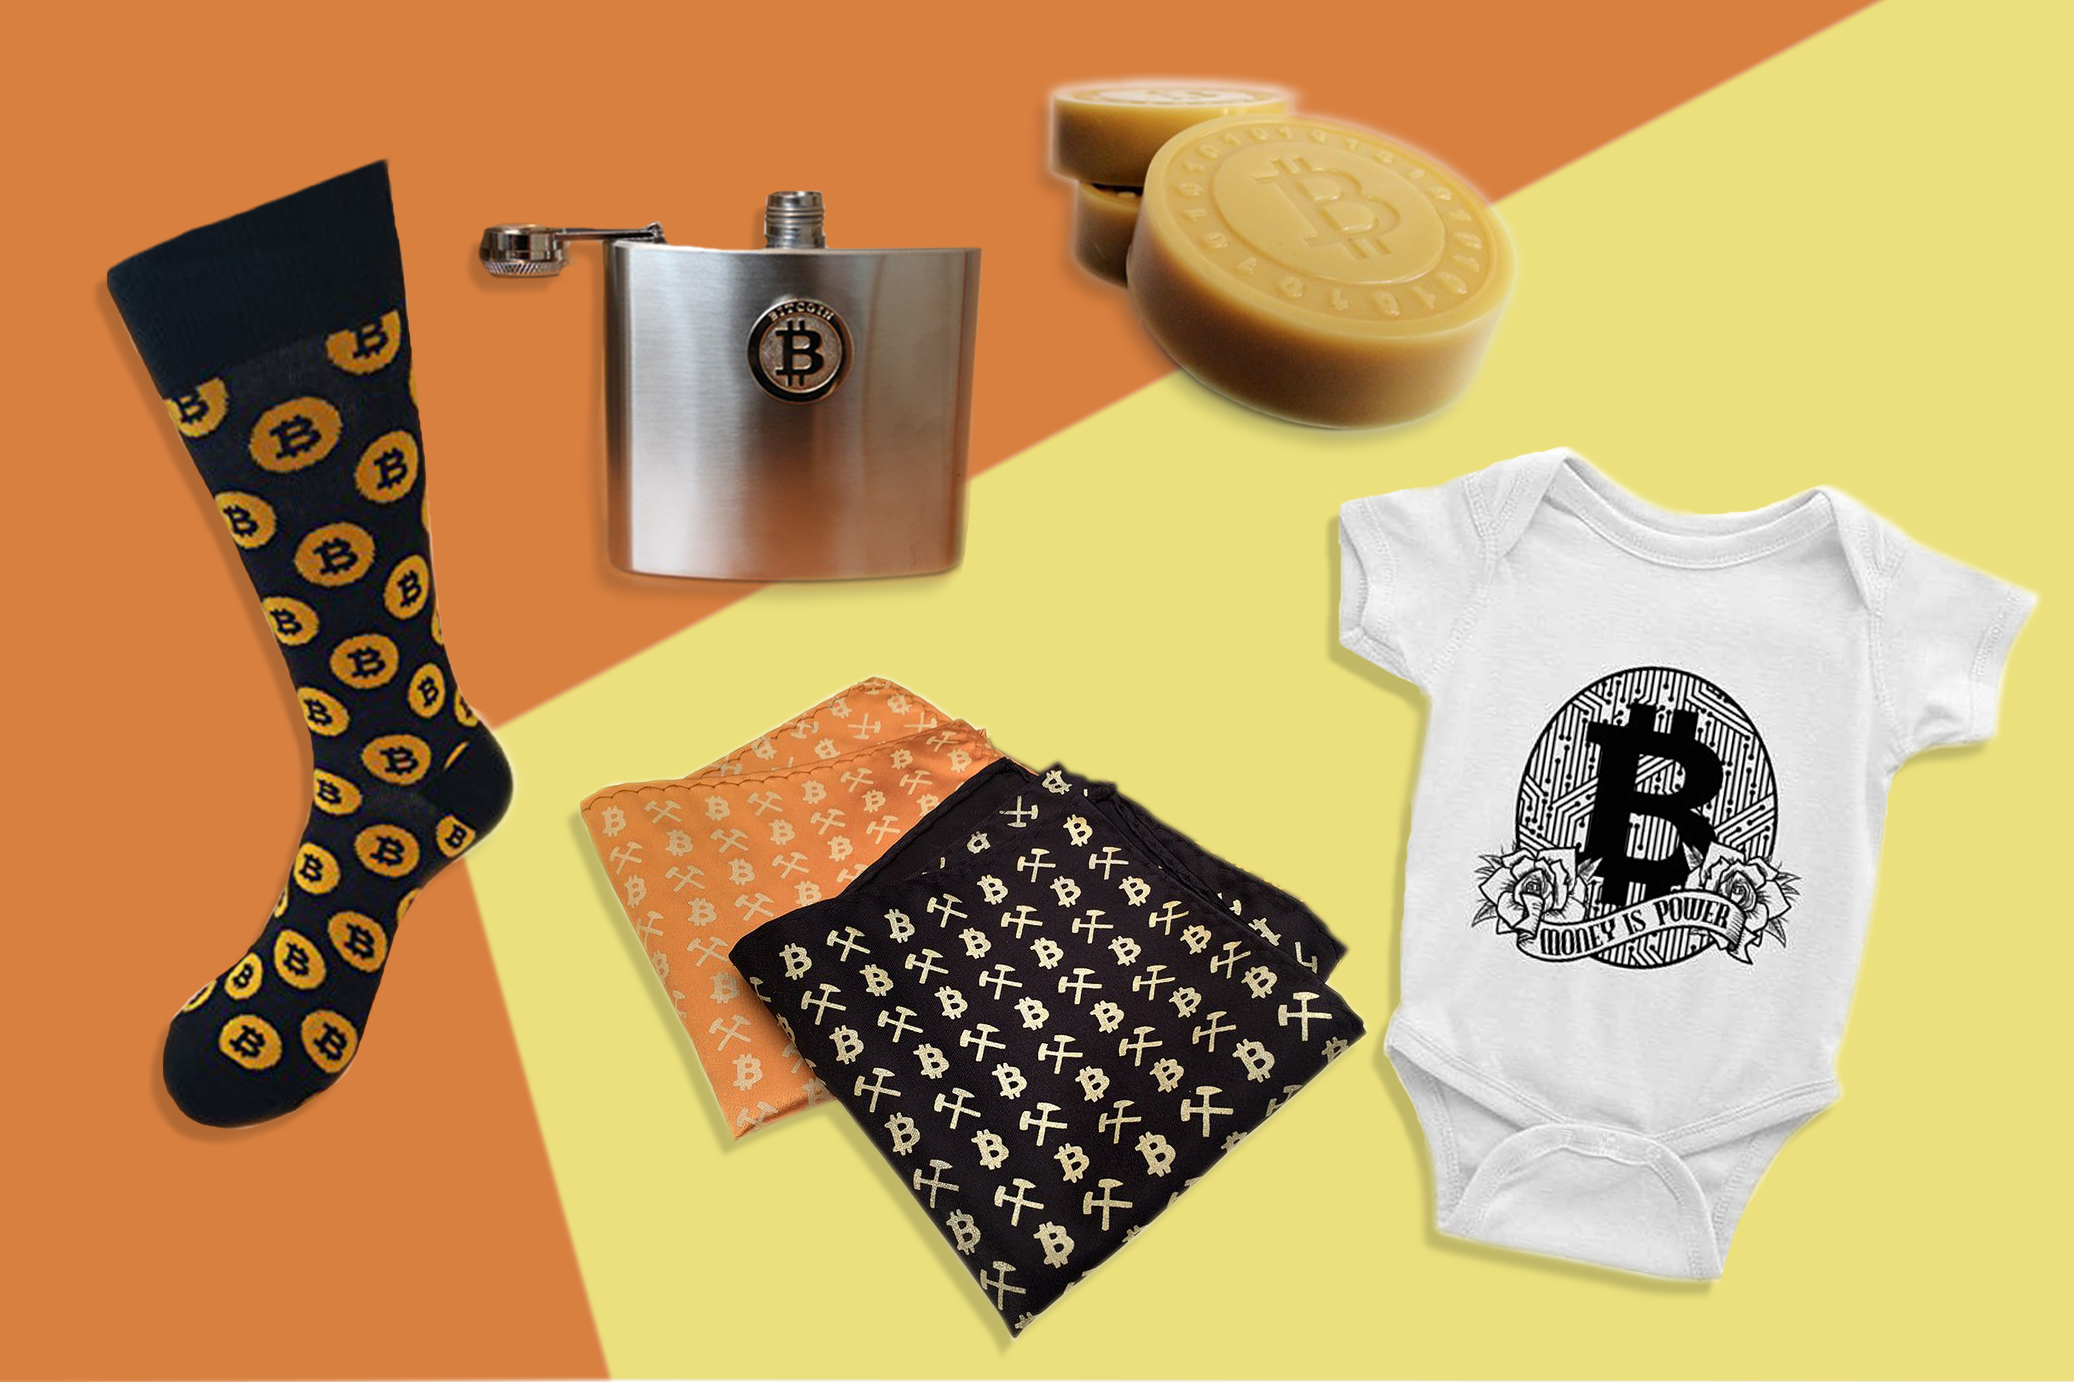 Peak Bubble? 11 Crazy Bitcoin-Related Gifts You Can Buy Before the Crash